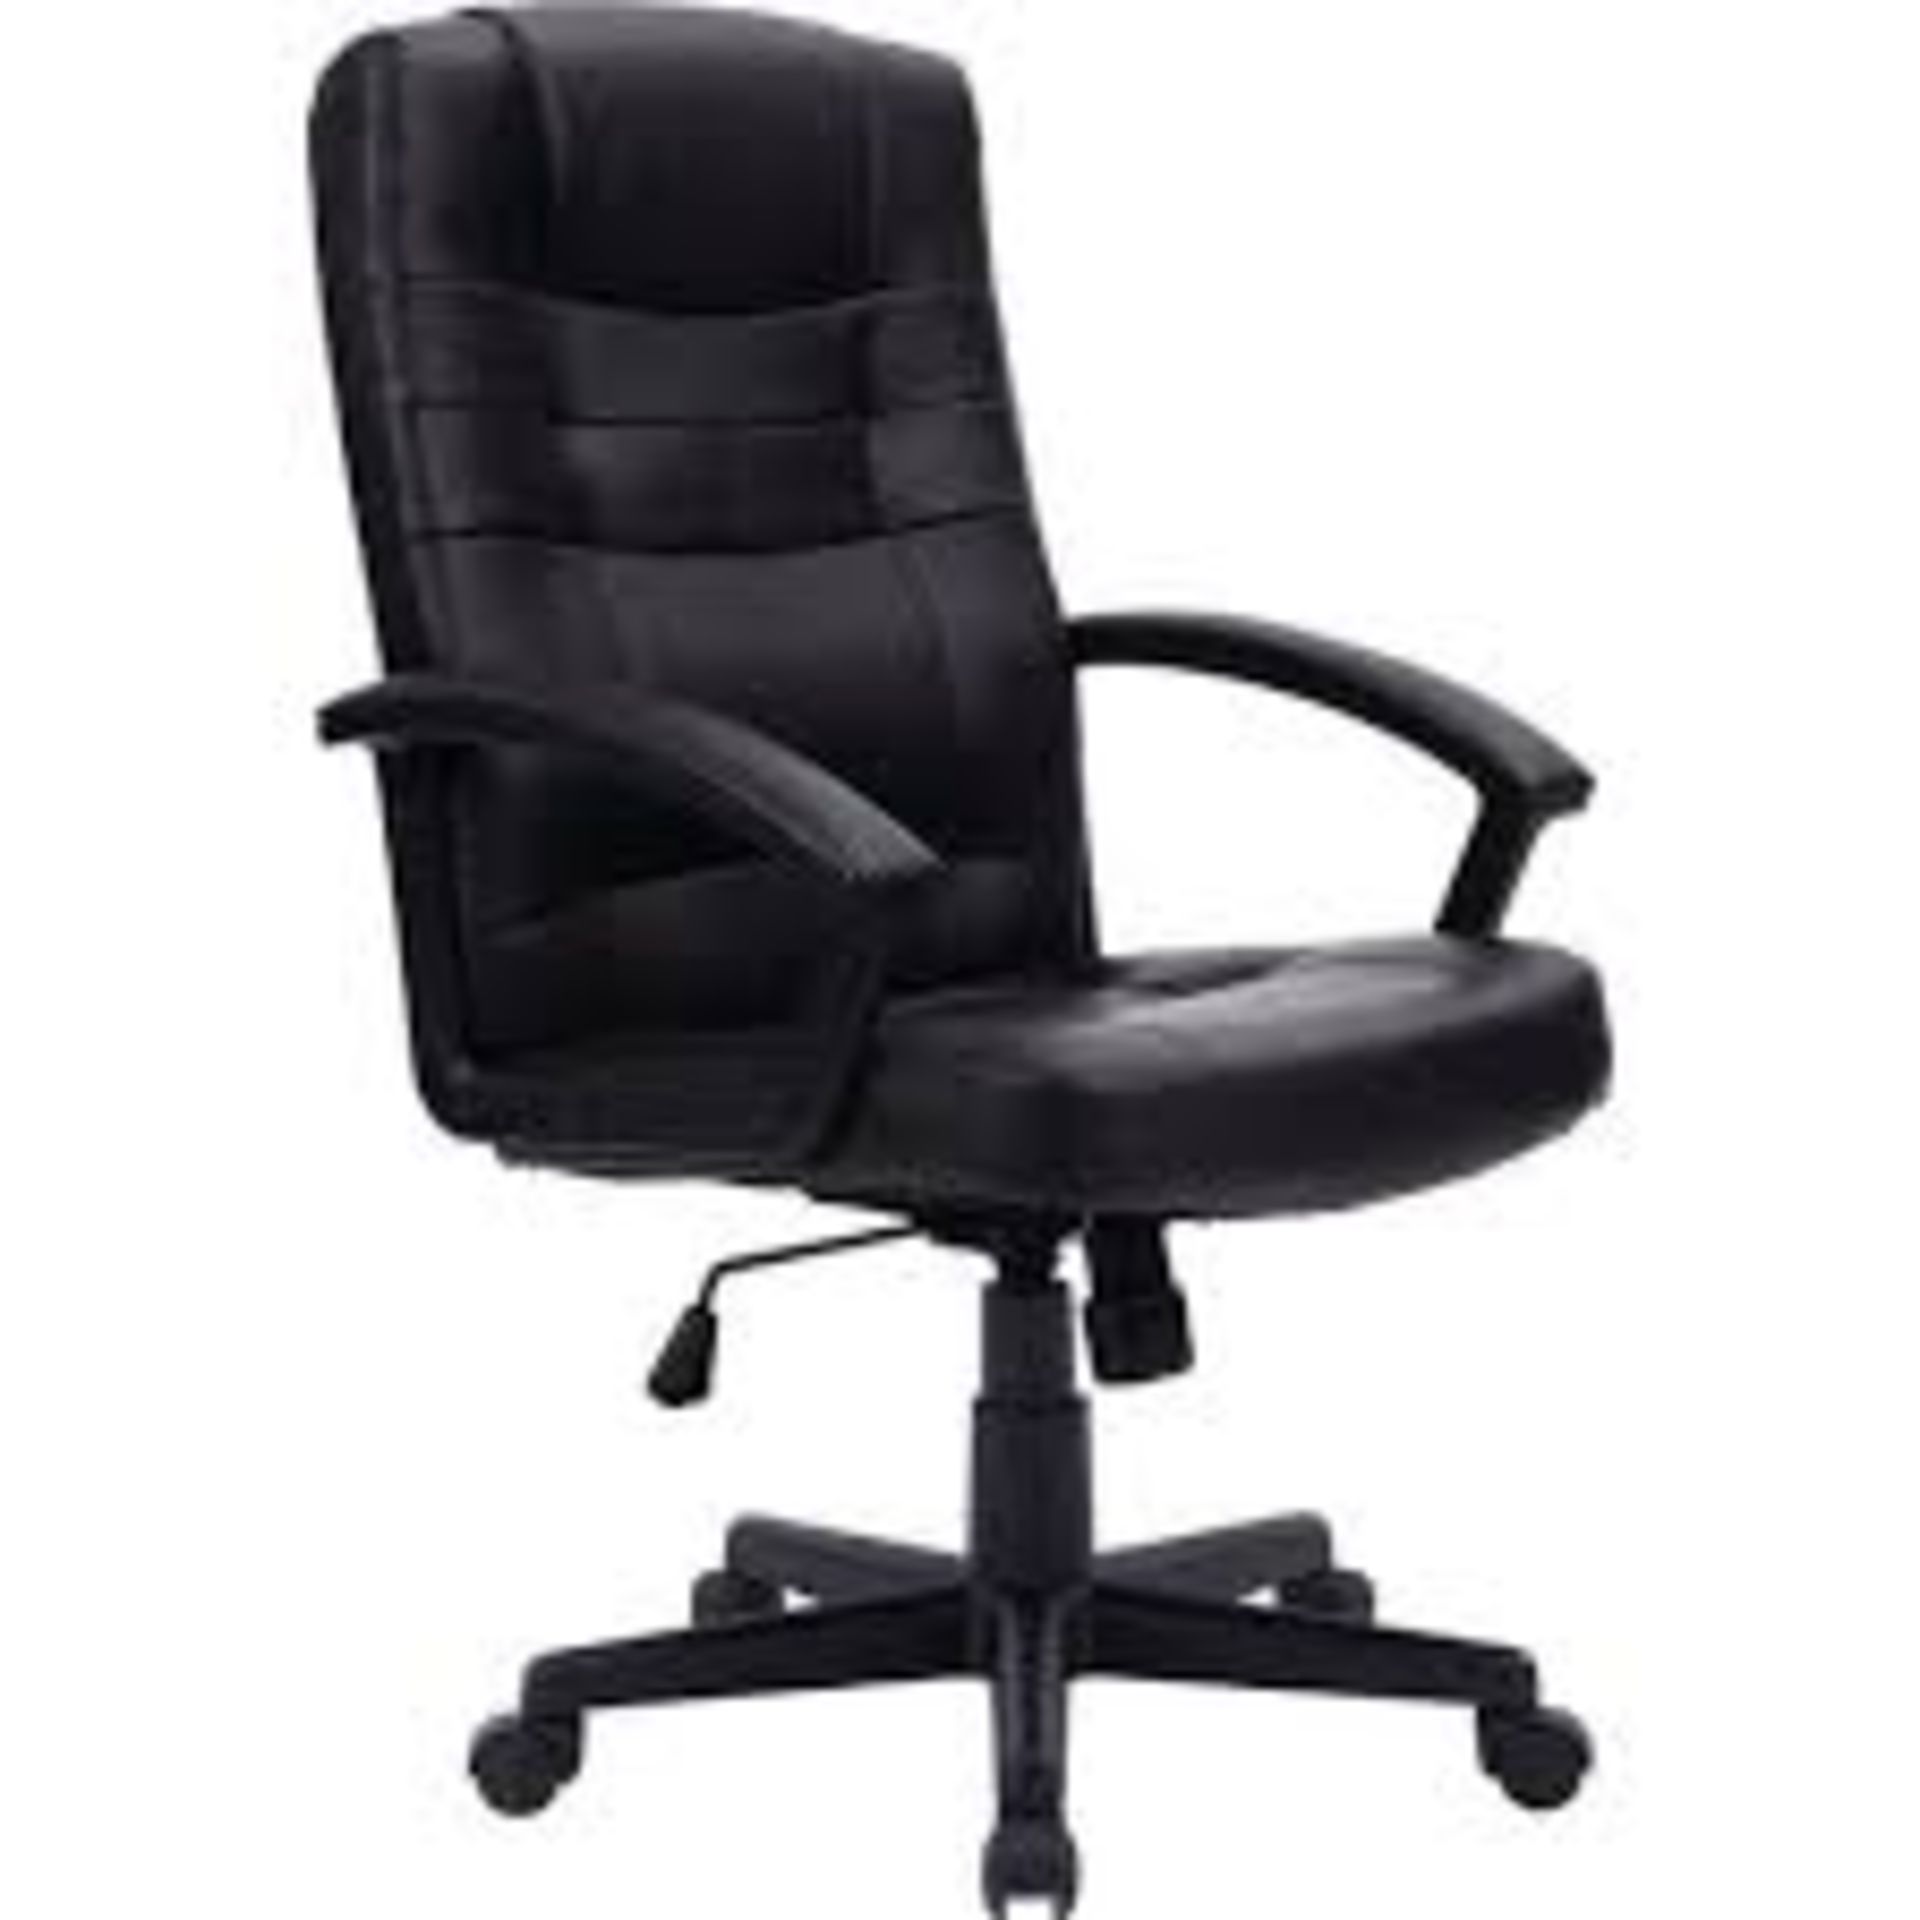 BLACK LEATHER OFFICE CHAIR R10-7